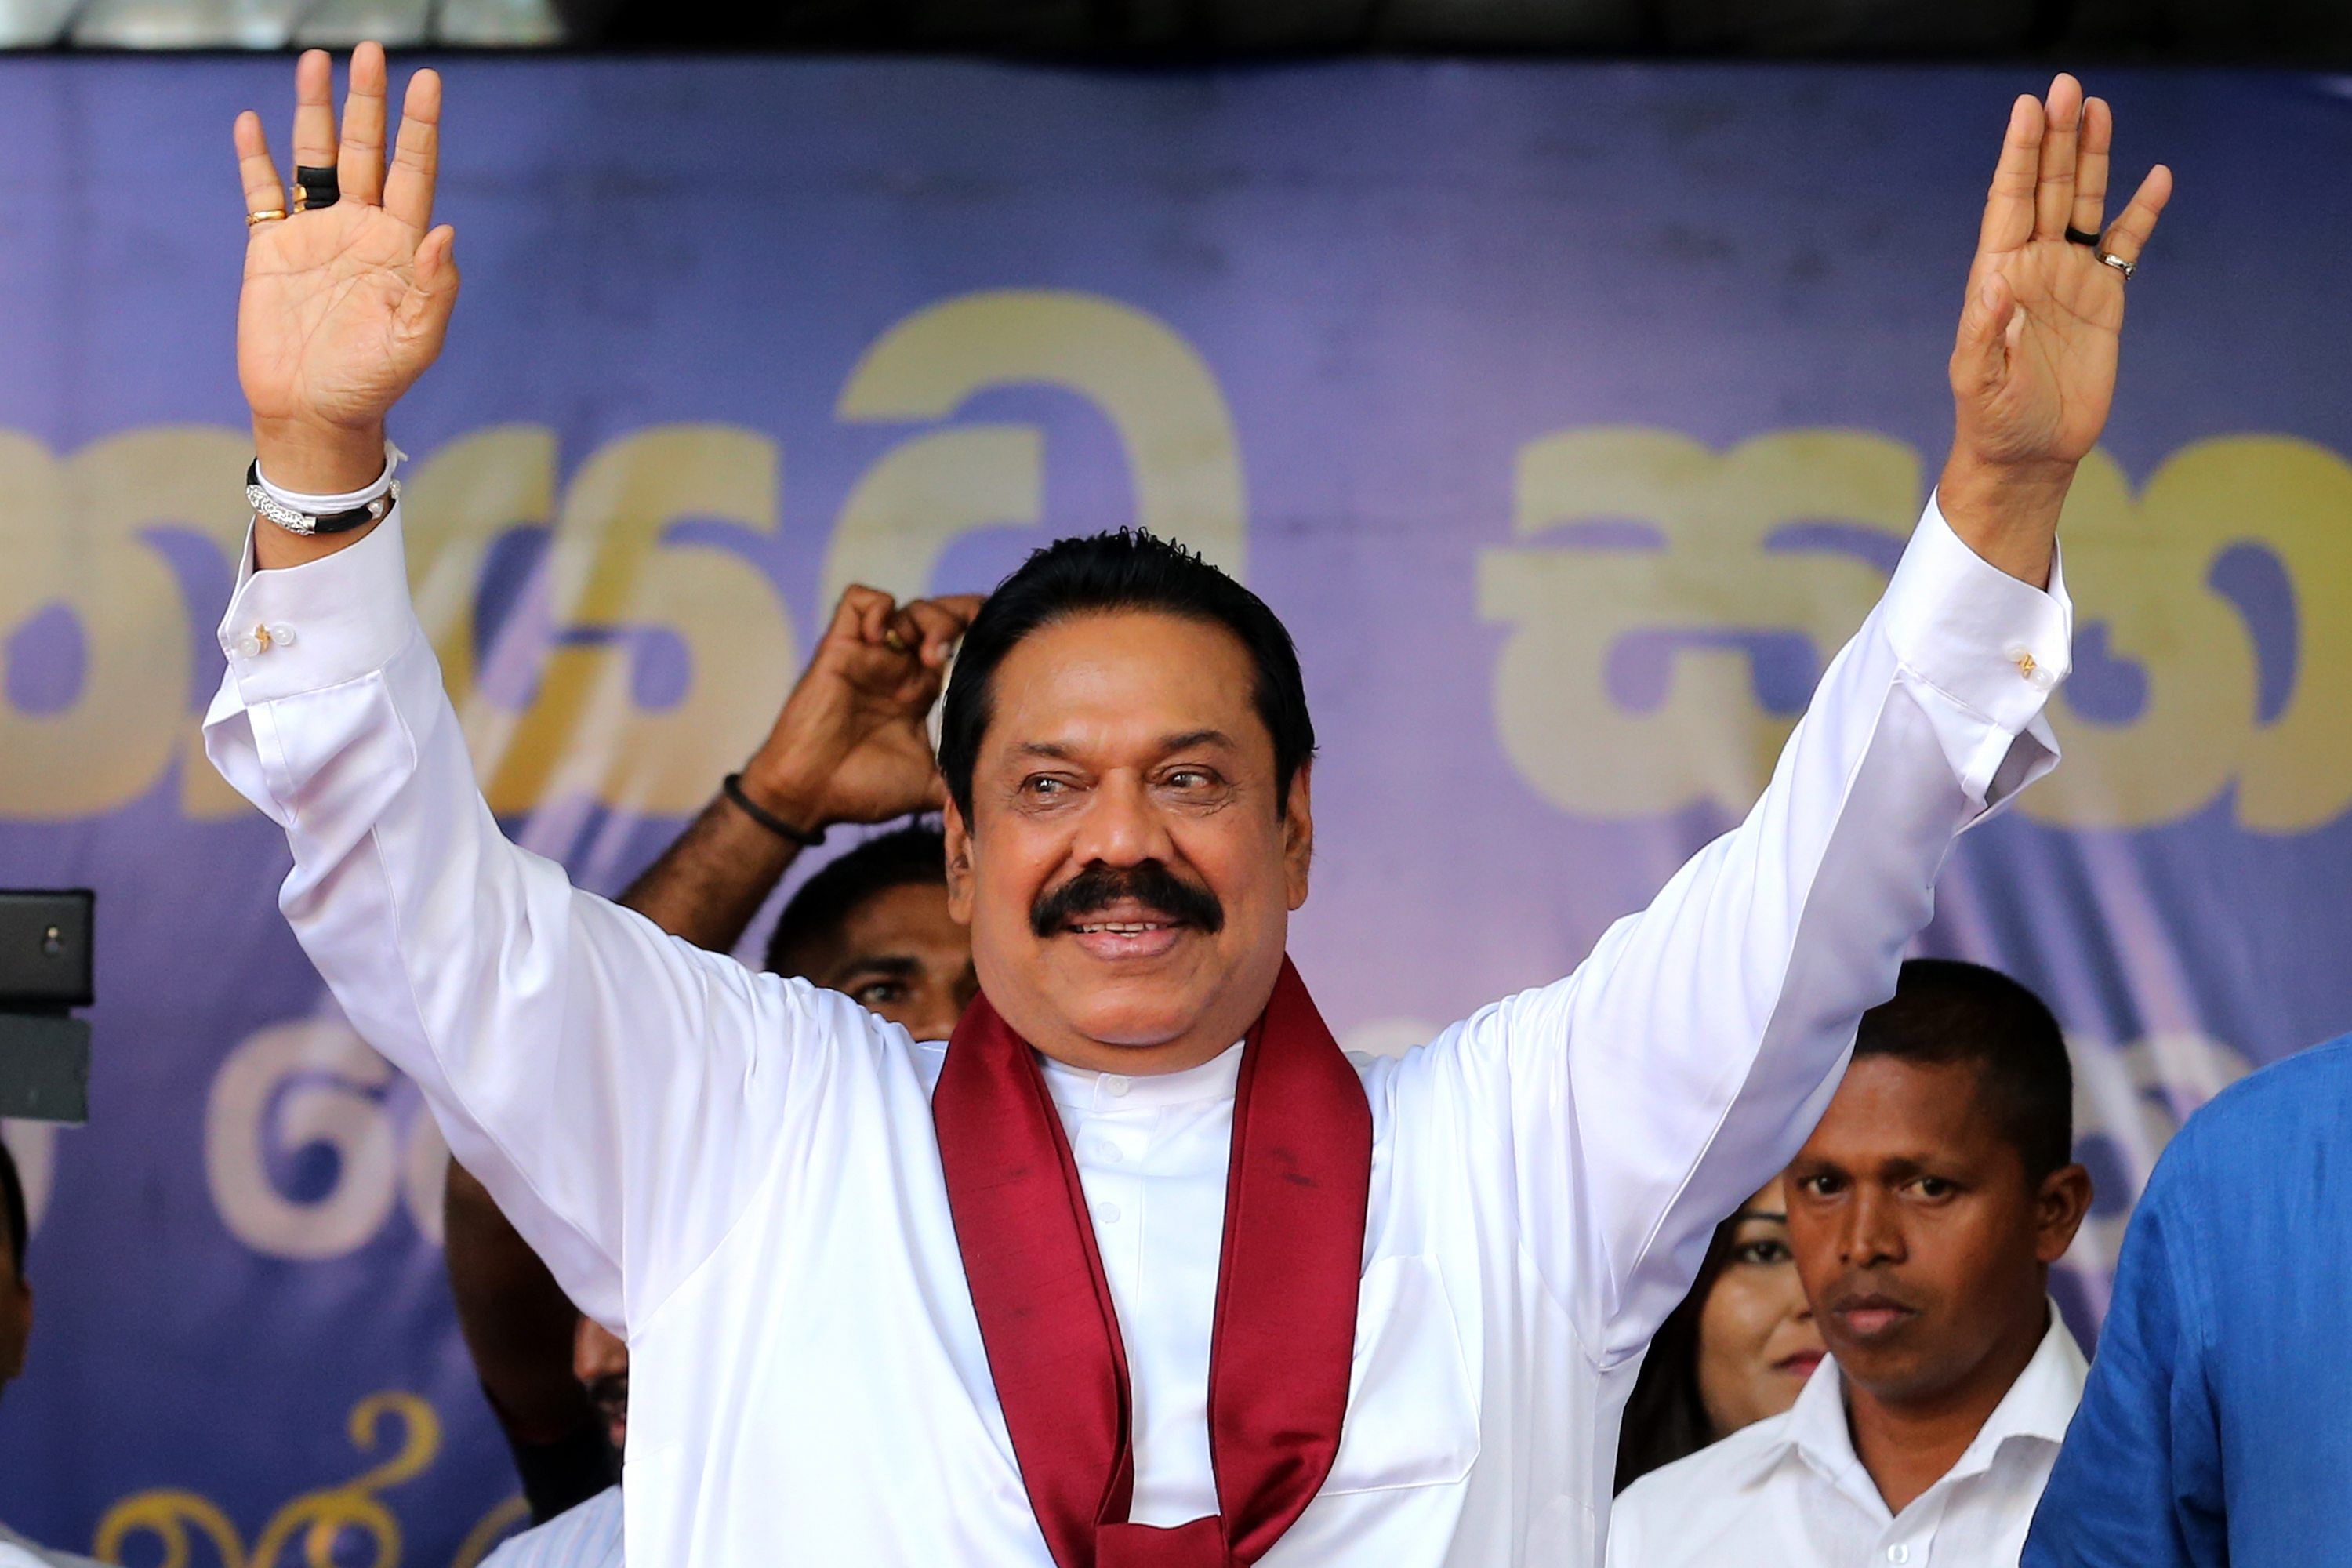 Rajapaksa was appointed the prime minister on October 26, 2018, by the then President Maithripala Sirisena, who sacked Wickremesinghe in a controversial move that plunged the country into an unprecedented constitutional crisis. Photo/Getty